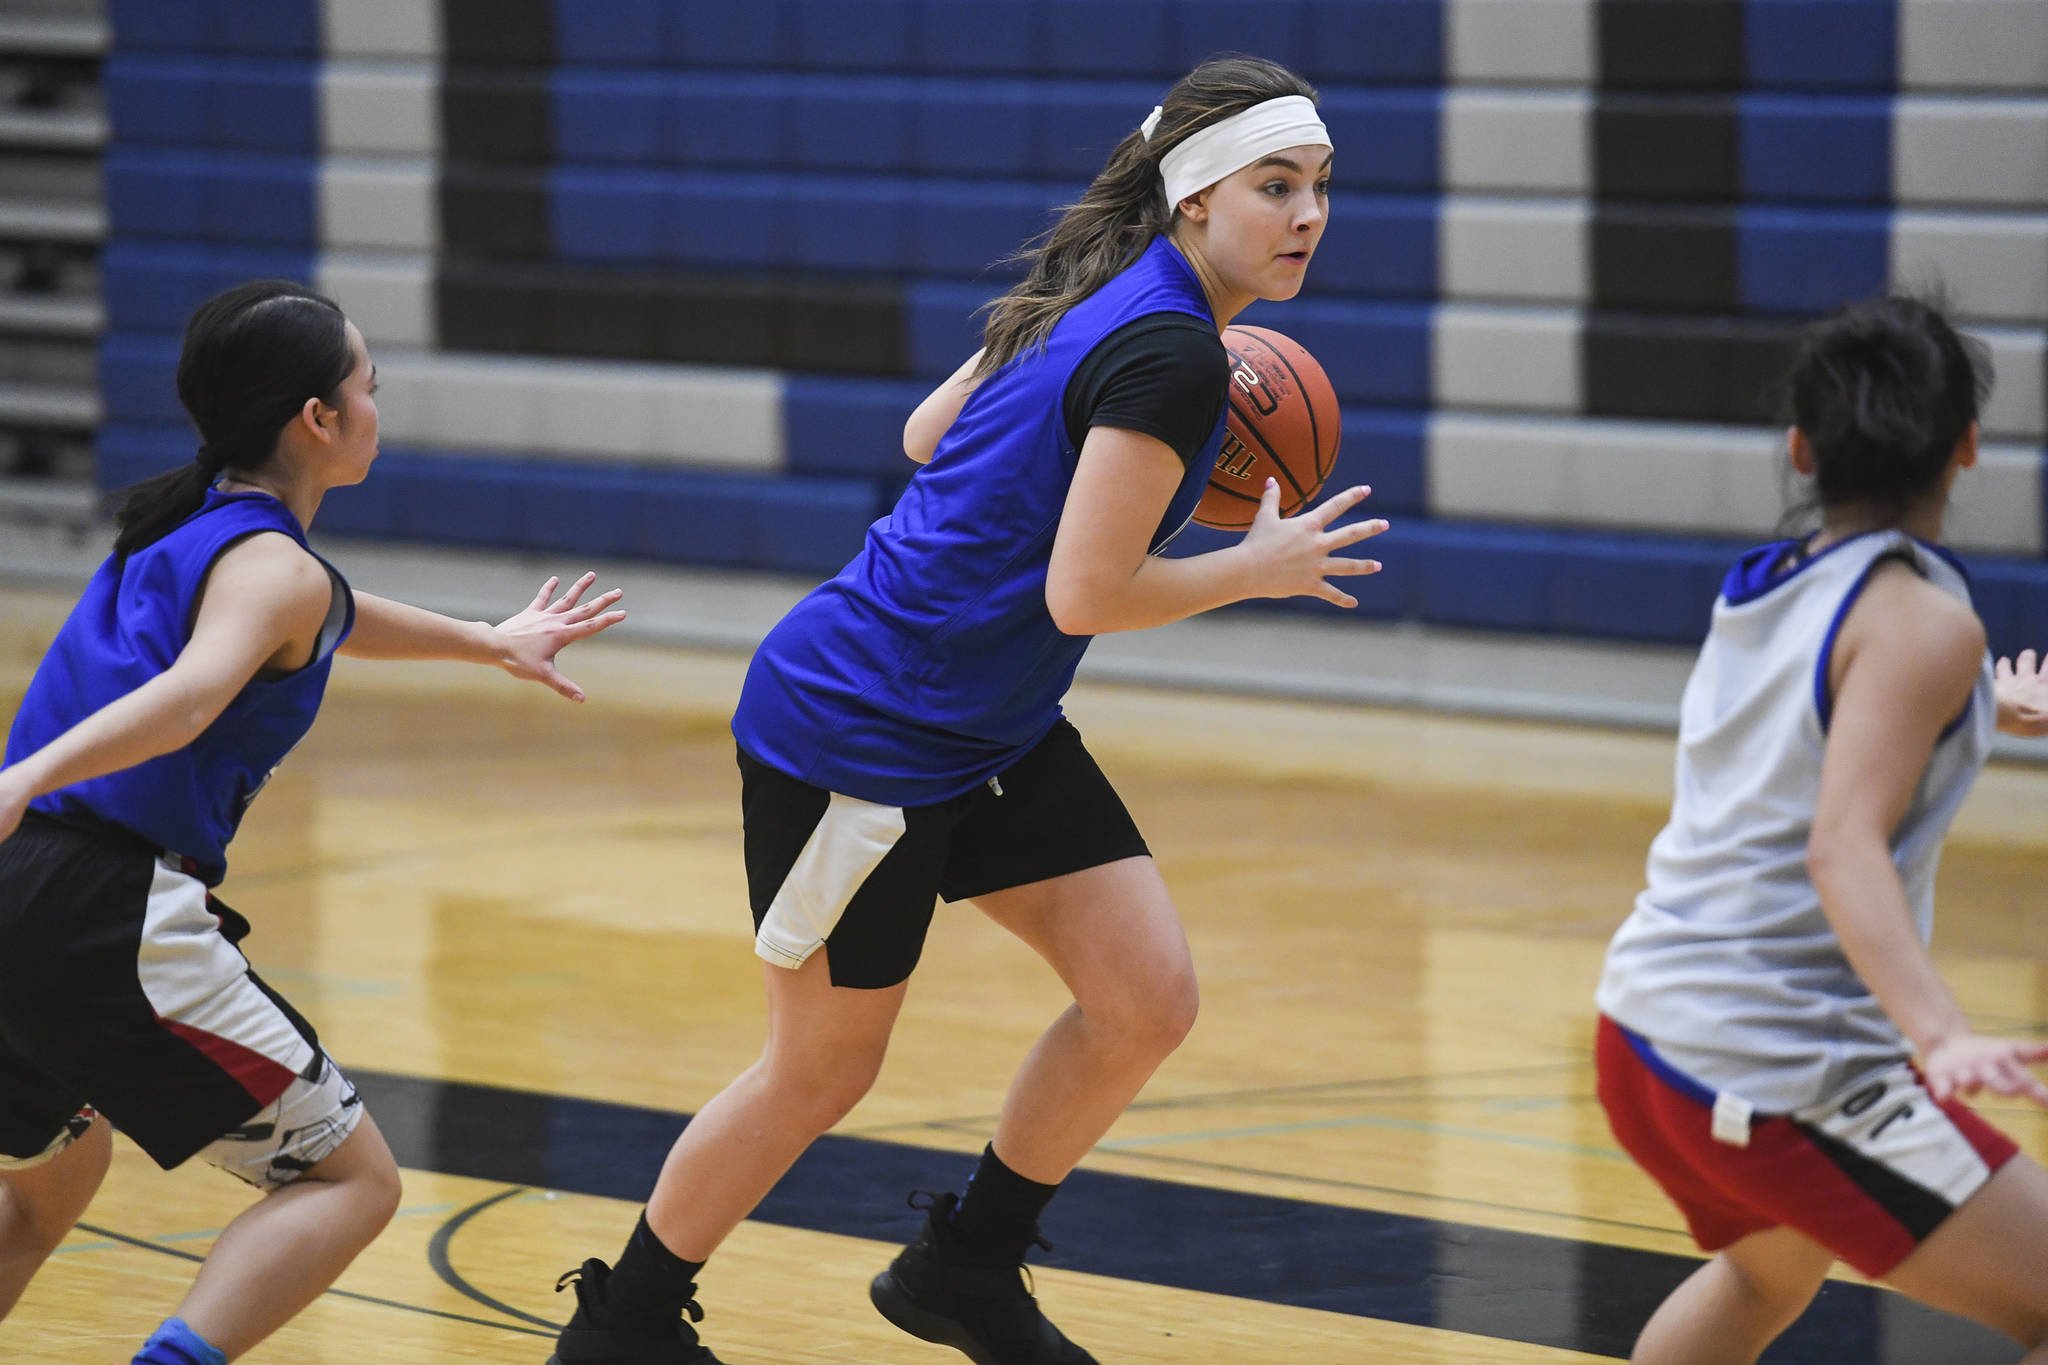 Avery Kreischer, center, is guarded by Mary Neal Garcia, left, and Mary Khaye Garcia during girls varsity basketball practice at Thunder Mountain High School on Monday, Dec. 9, 2019. (Michael Penn | Juneau Empire)